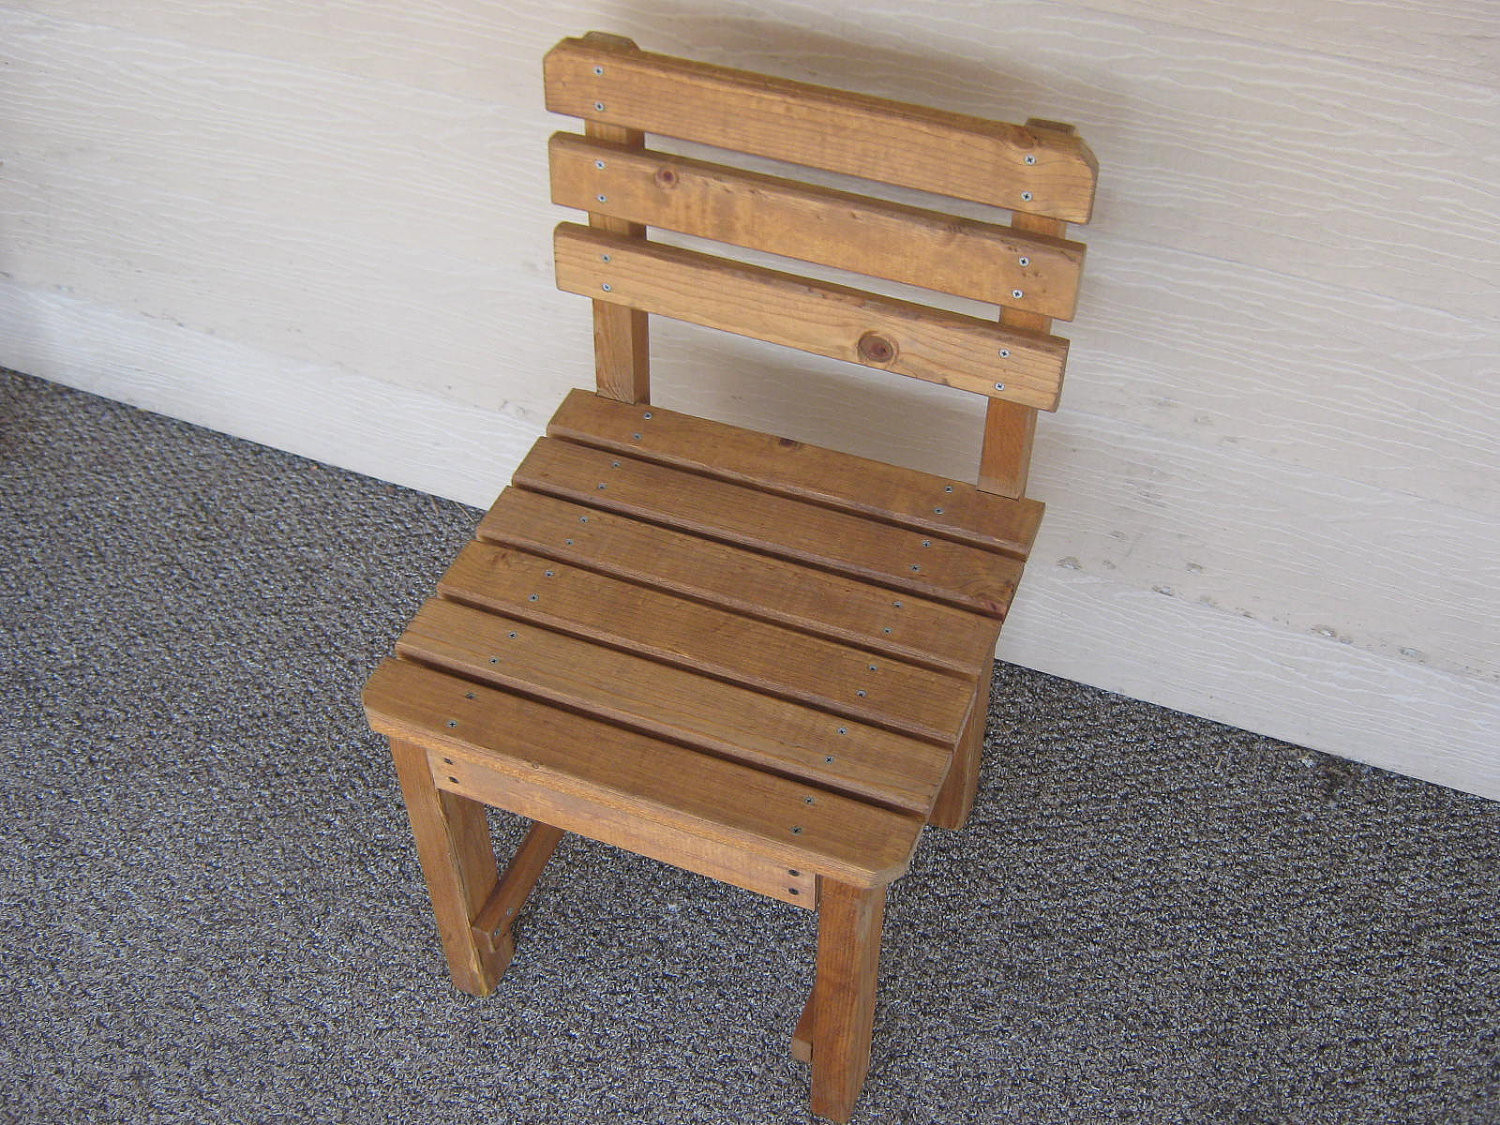 DIY Wooden Outdoor Furniture
 DIY PLANS to make Patio Chair Outdoor by wingstoshop on Etsy